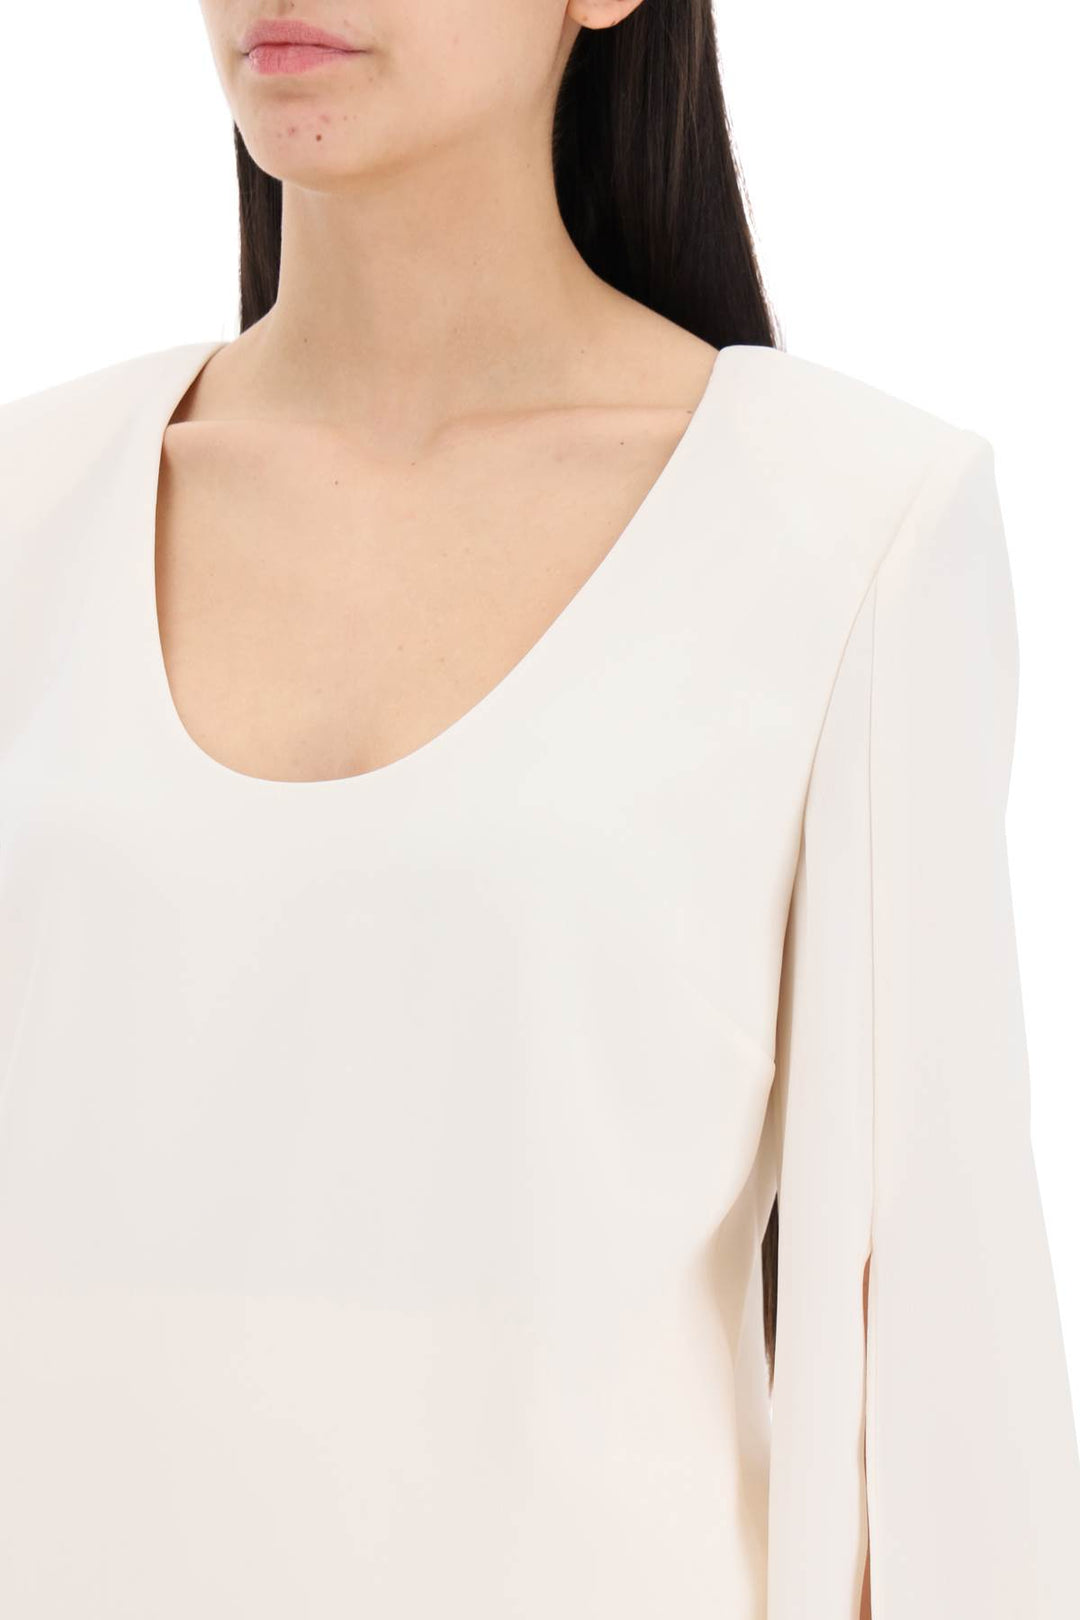 Roland Mouret Cady Top With Flared Sleeve   White